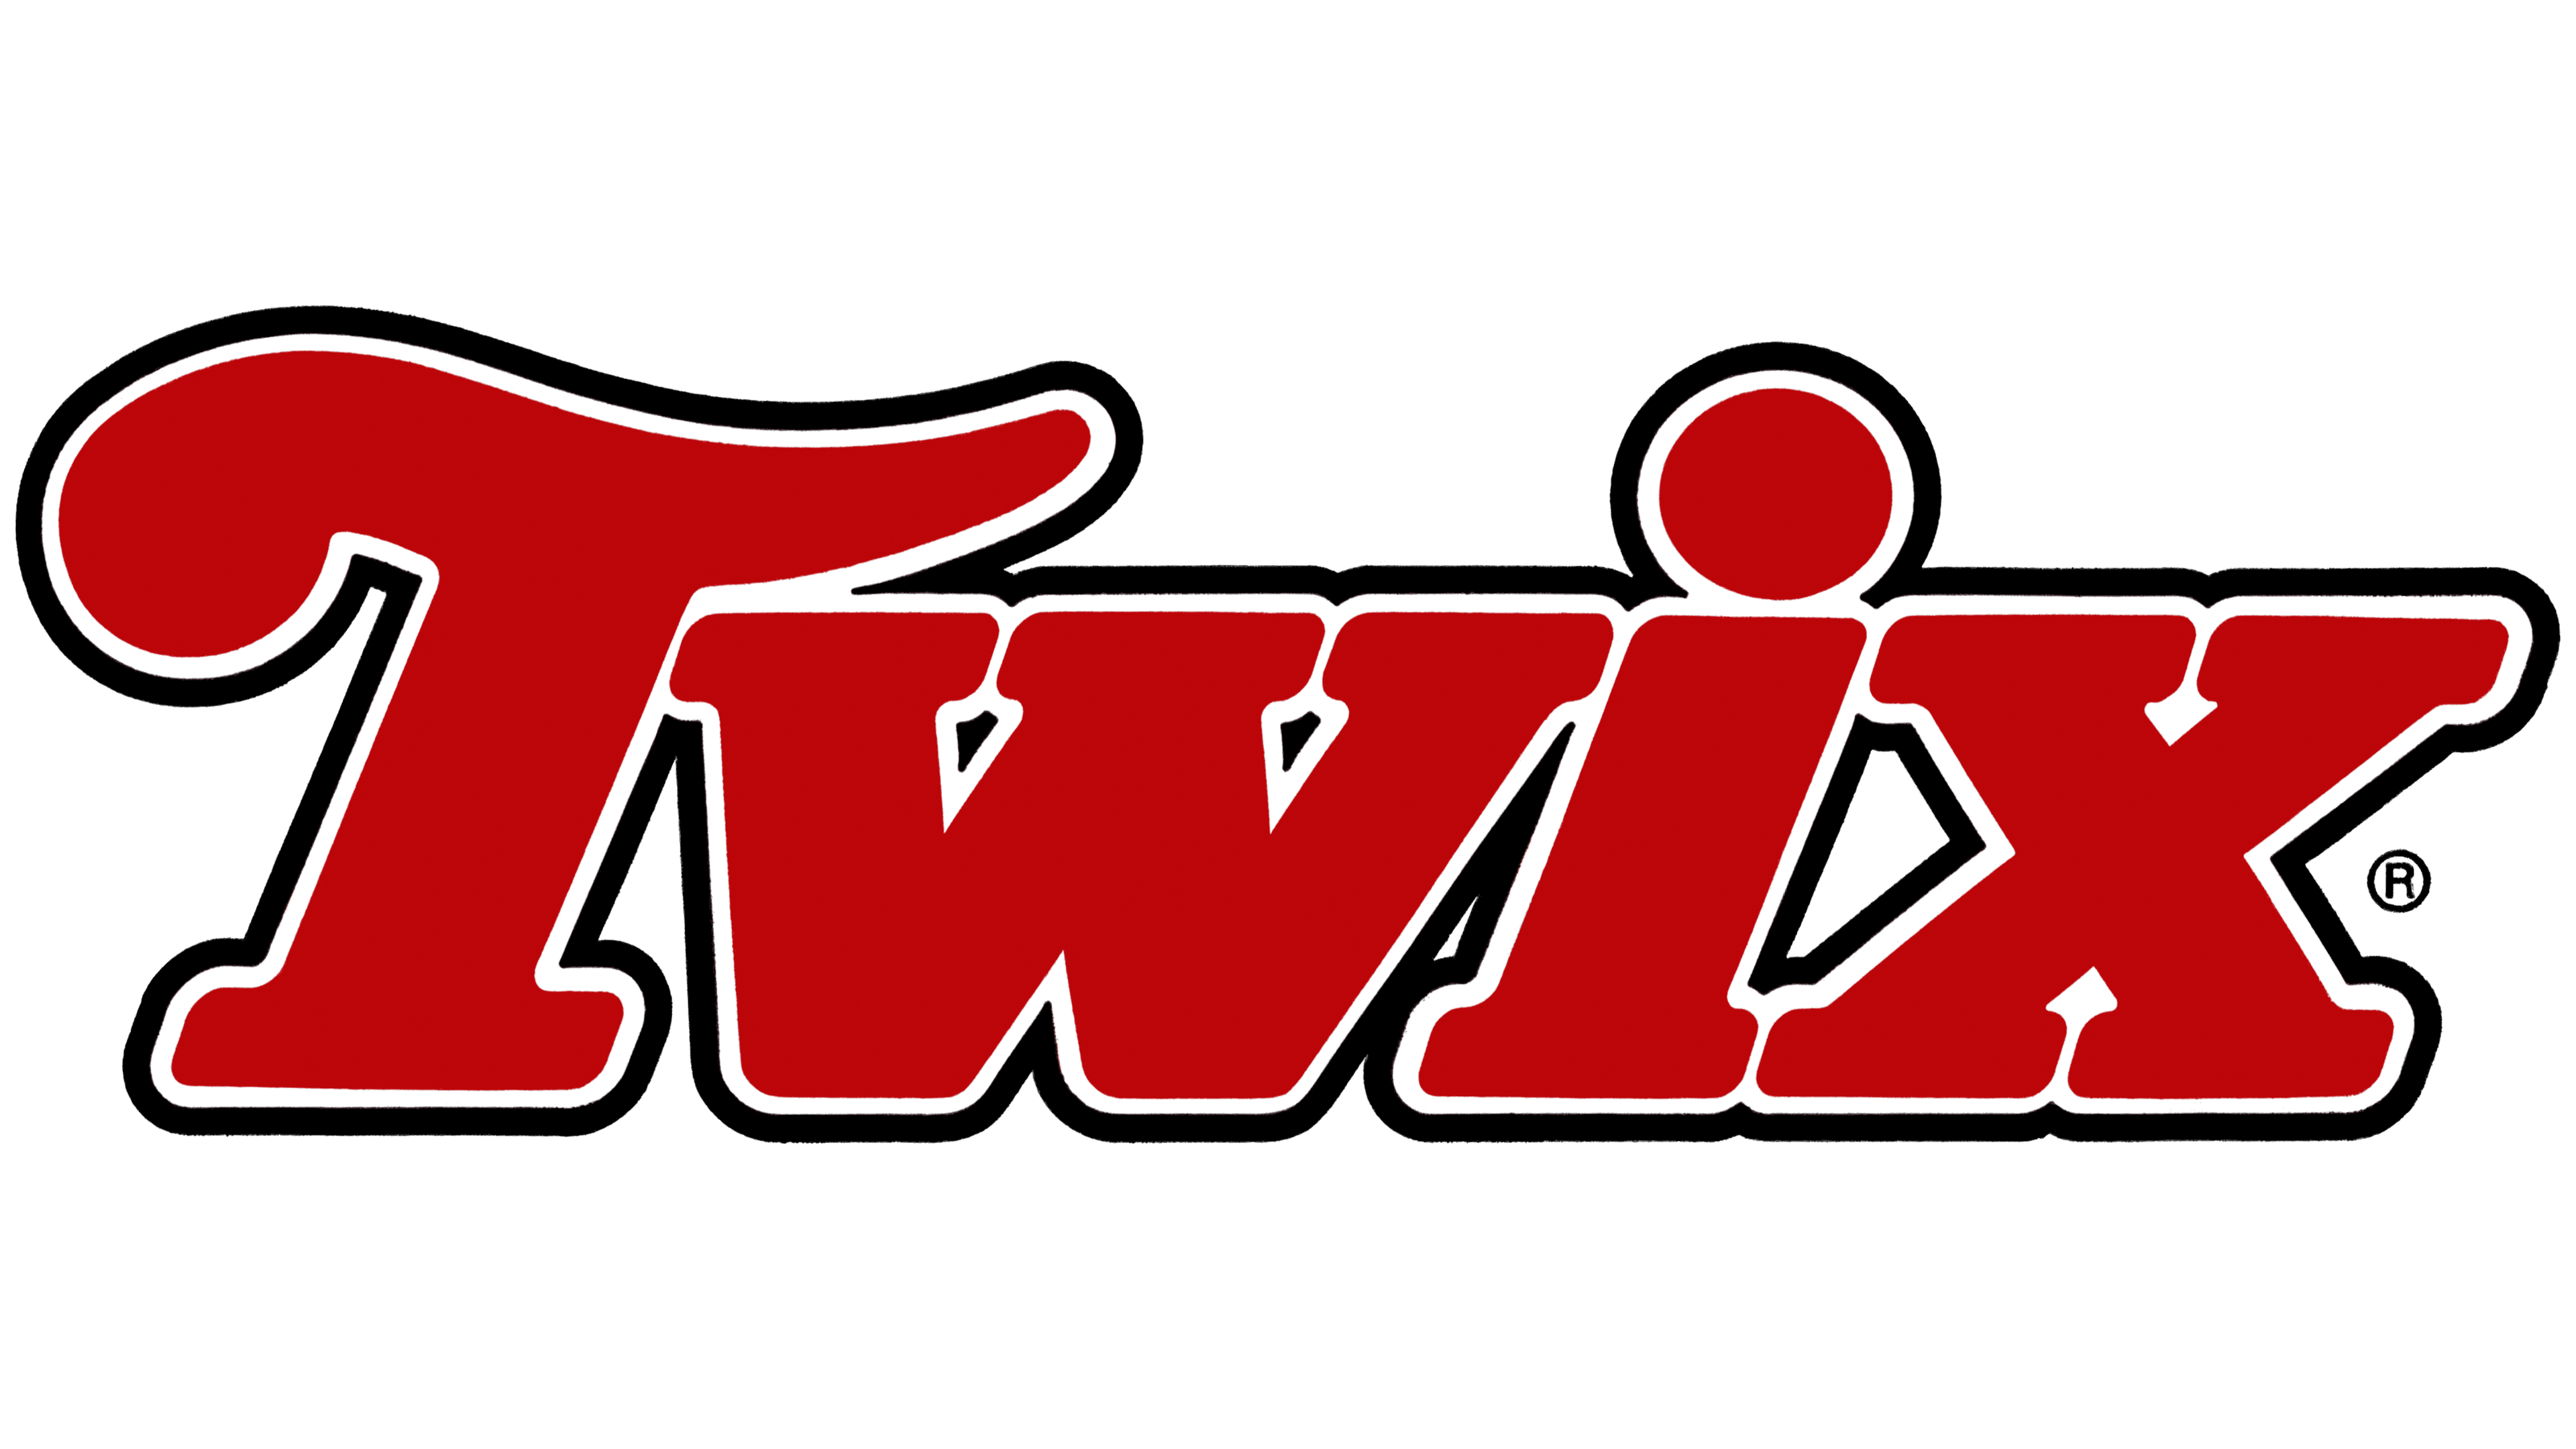 Twix Logo, symbol, meaning, history, PNG, brand